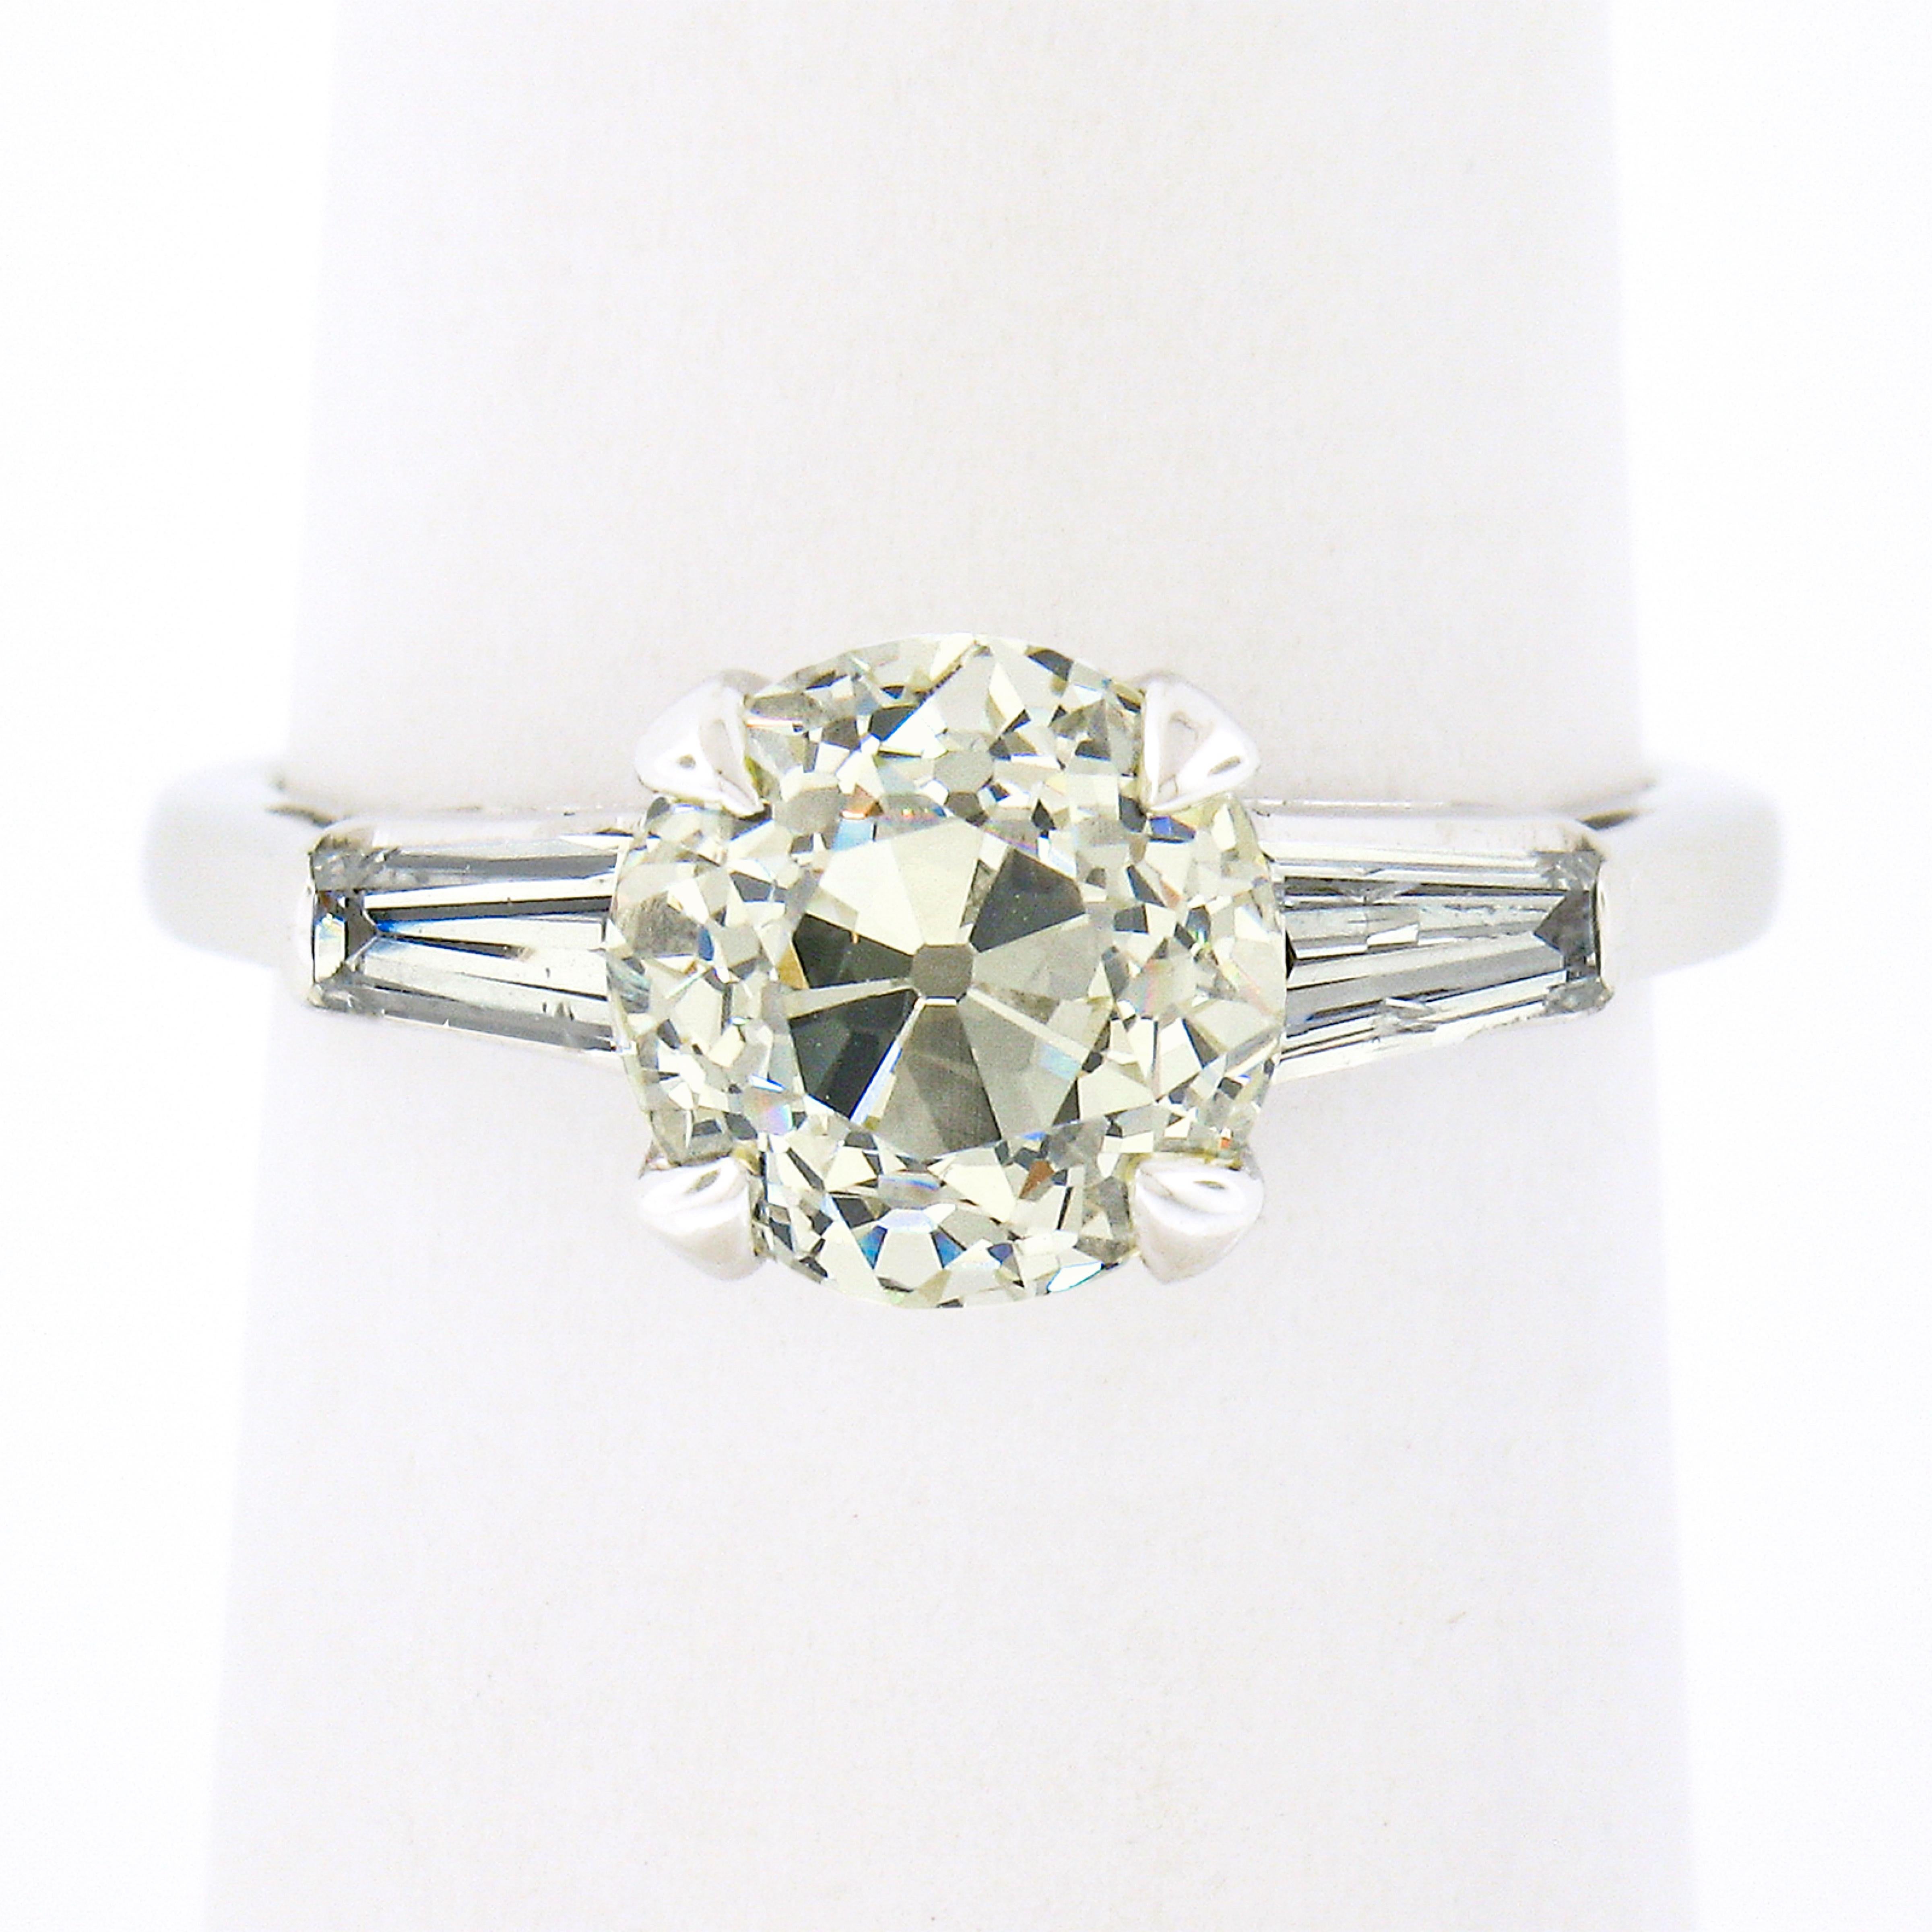 You are looking at a truly breathtaking vintage engagement ring that is crafted from solid platinum and is set with a GIA certified, early old European cut light yellow diamond. This chunky old cut center diamond is certified at exactly 2.36 carats